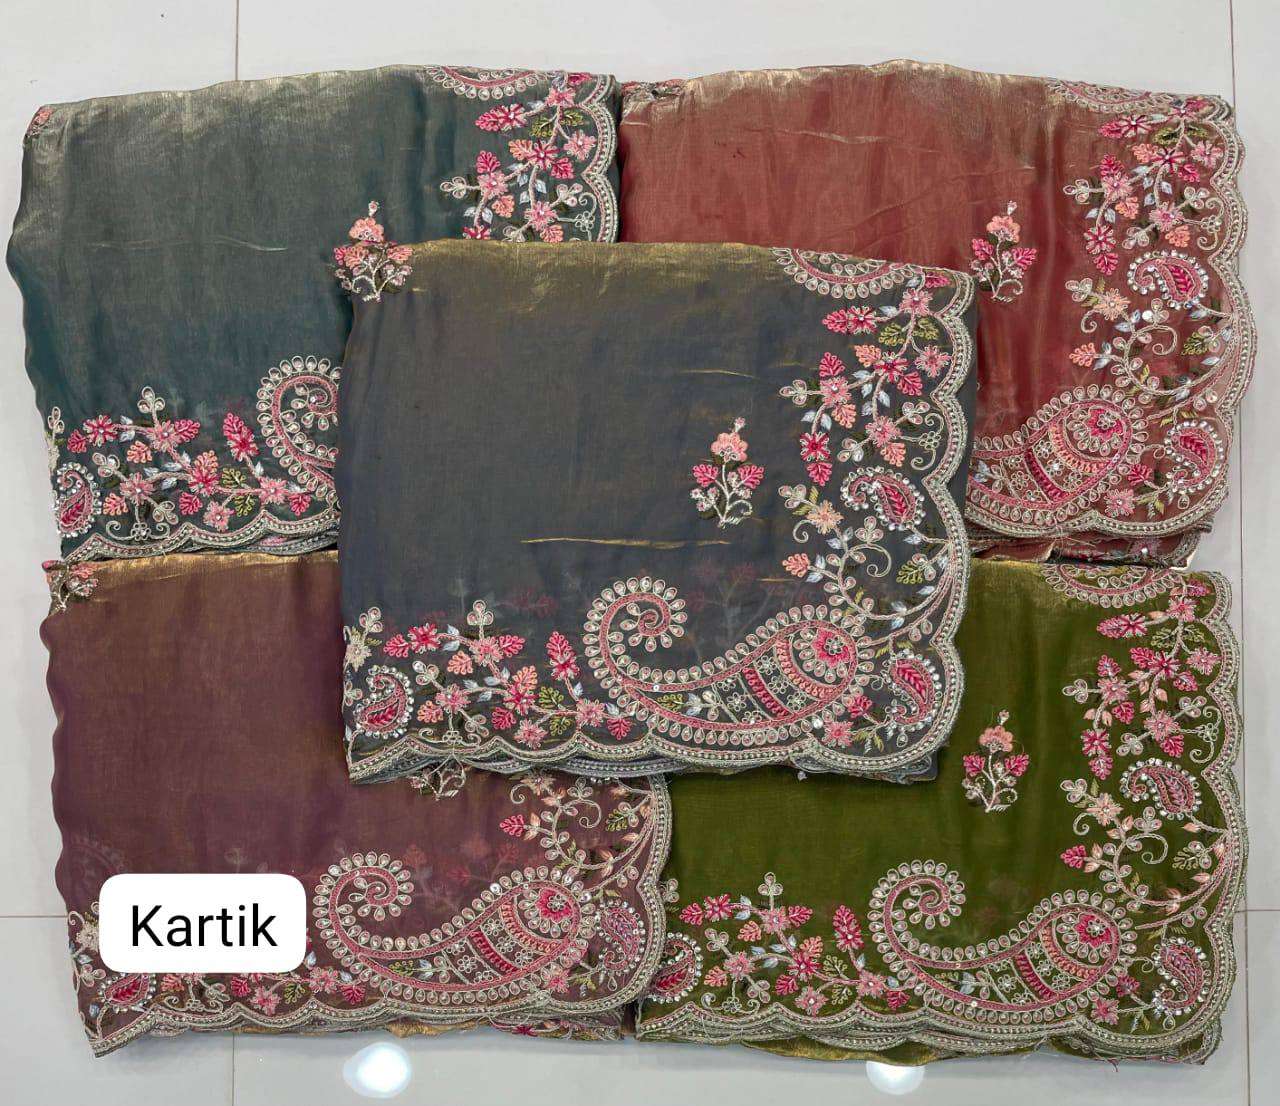 KARTIK BY ASLIWHOLESALE DESIGNER EXCLUSIVE FANCY EMBROIDERY SAREES